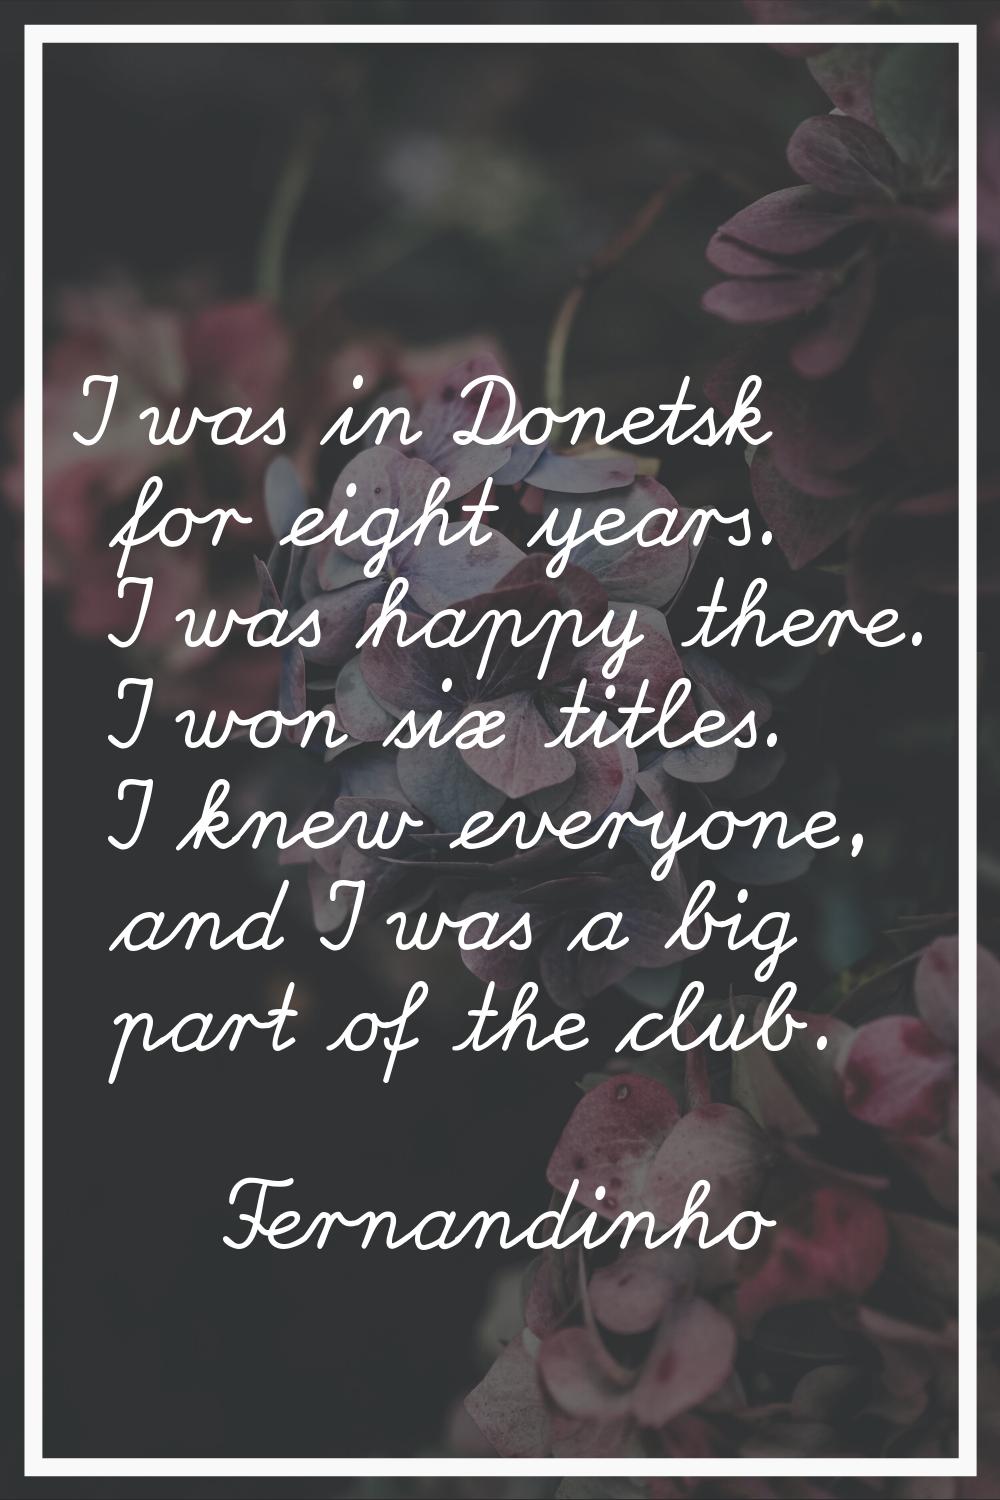 I was in Donetsk for eight years. I was happy there. I won six titles. I knew everyone, and I was a